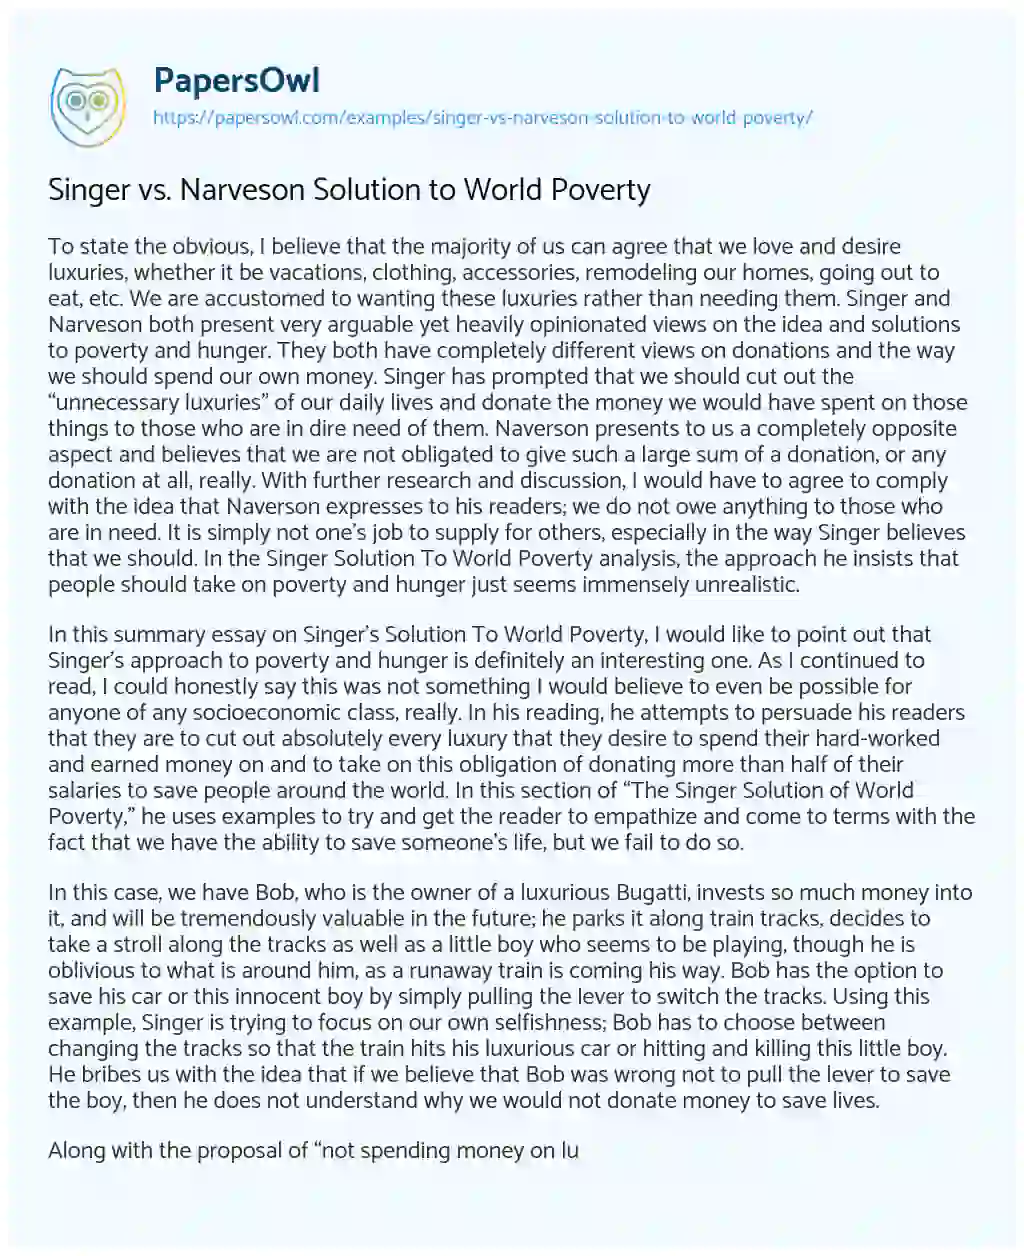 Essay on Singer Vs. Narveson Solution to World Poverty